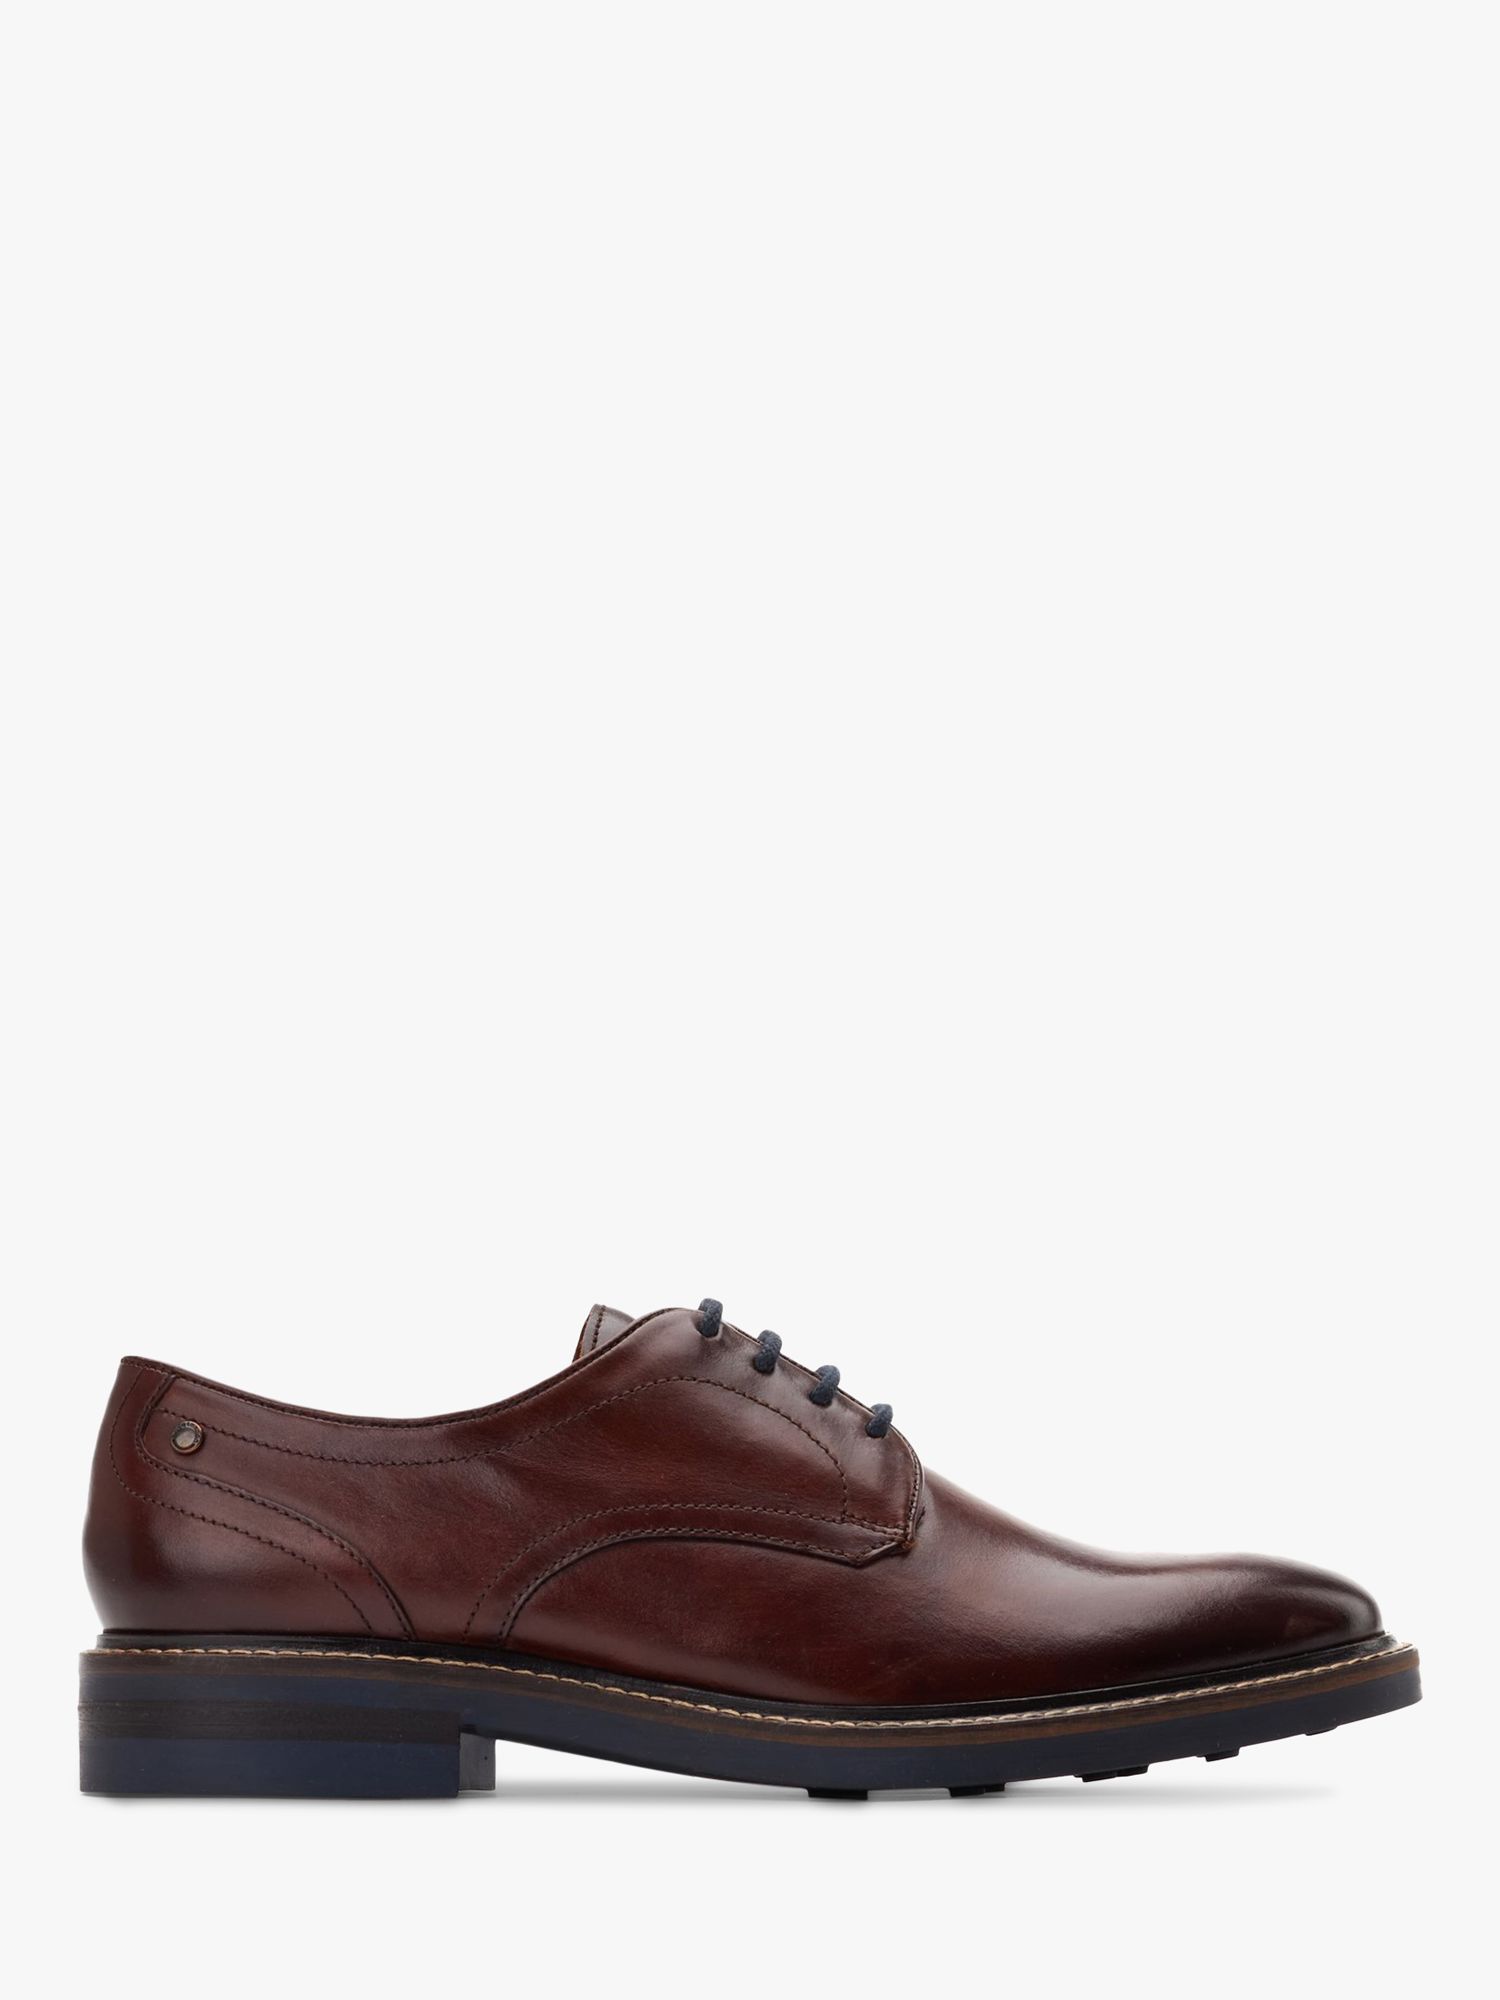 Base London Mawley Chunky Derby Shoe, Brown at John Lewis & Partners